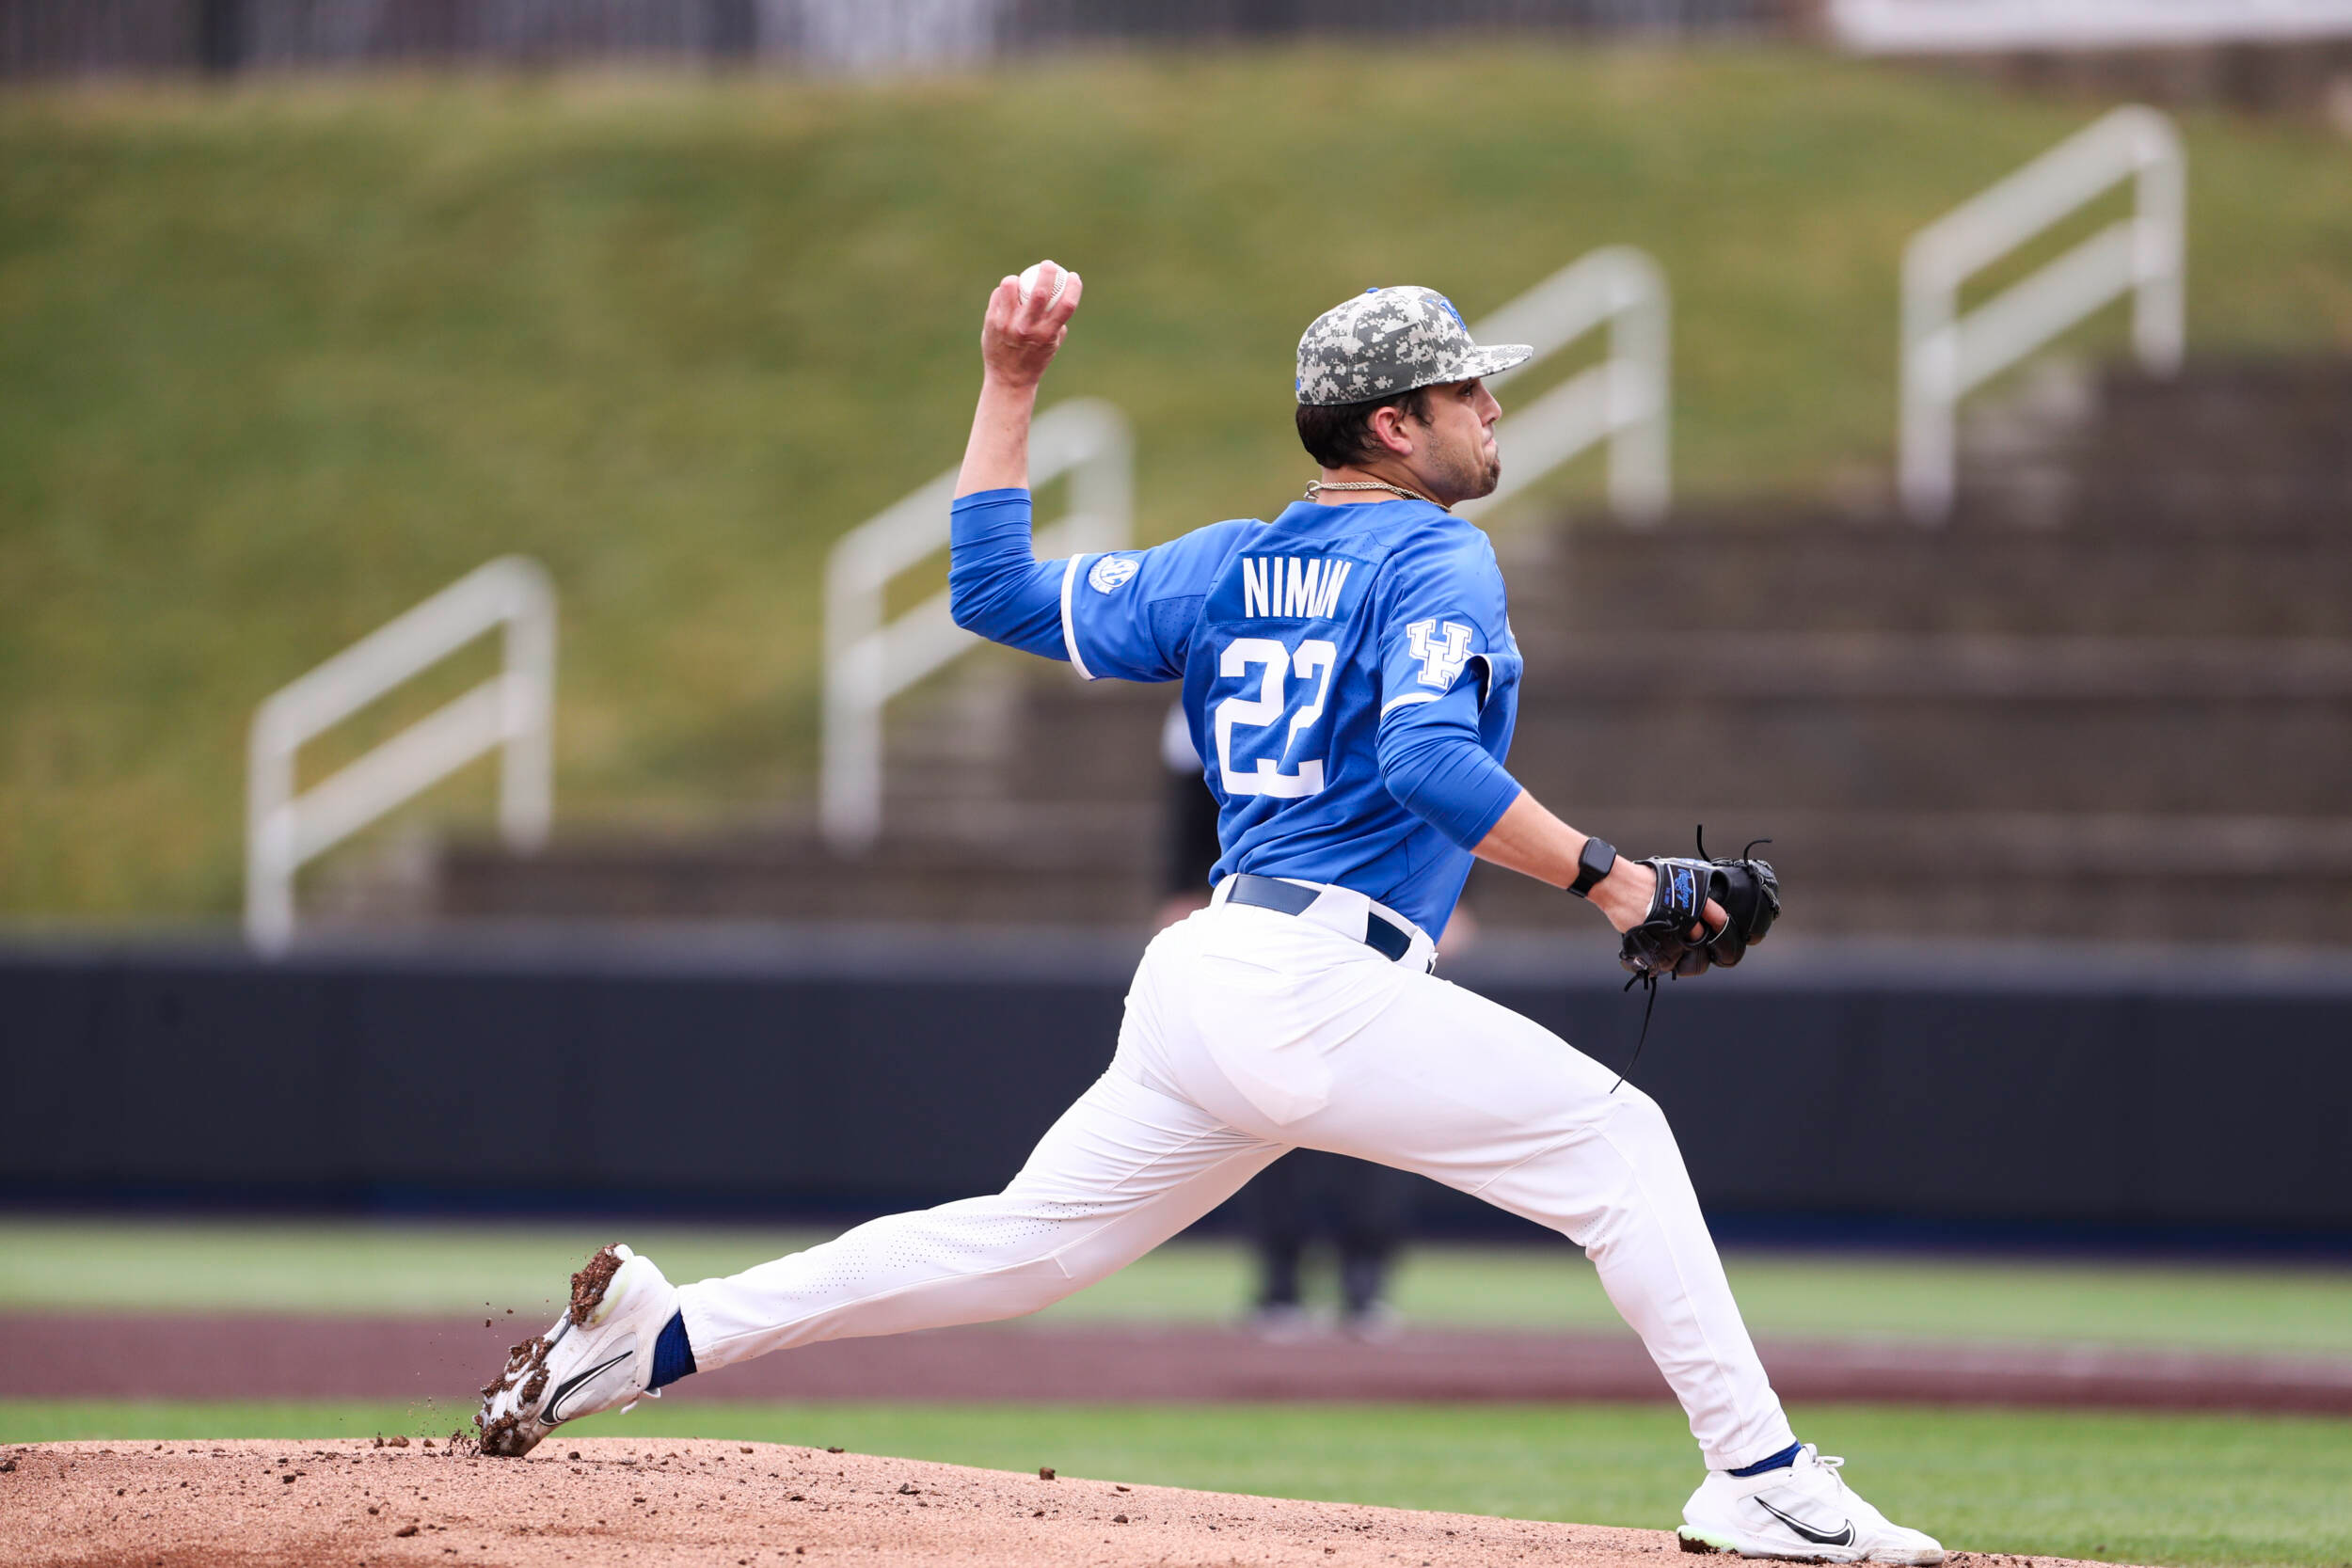 Dom Day: Dominic Niman Shines in Kentucky’s Run-Rule Victory